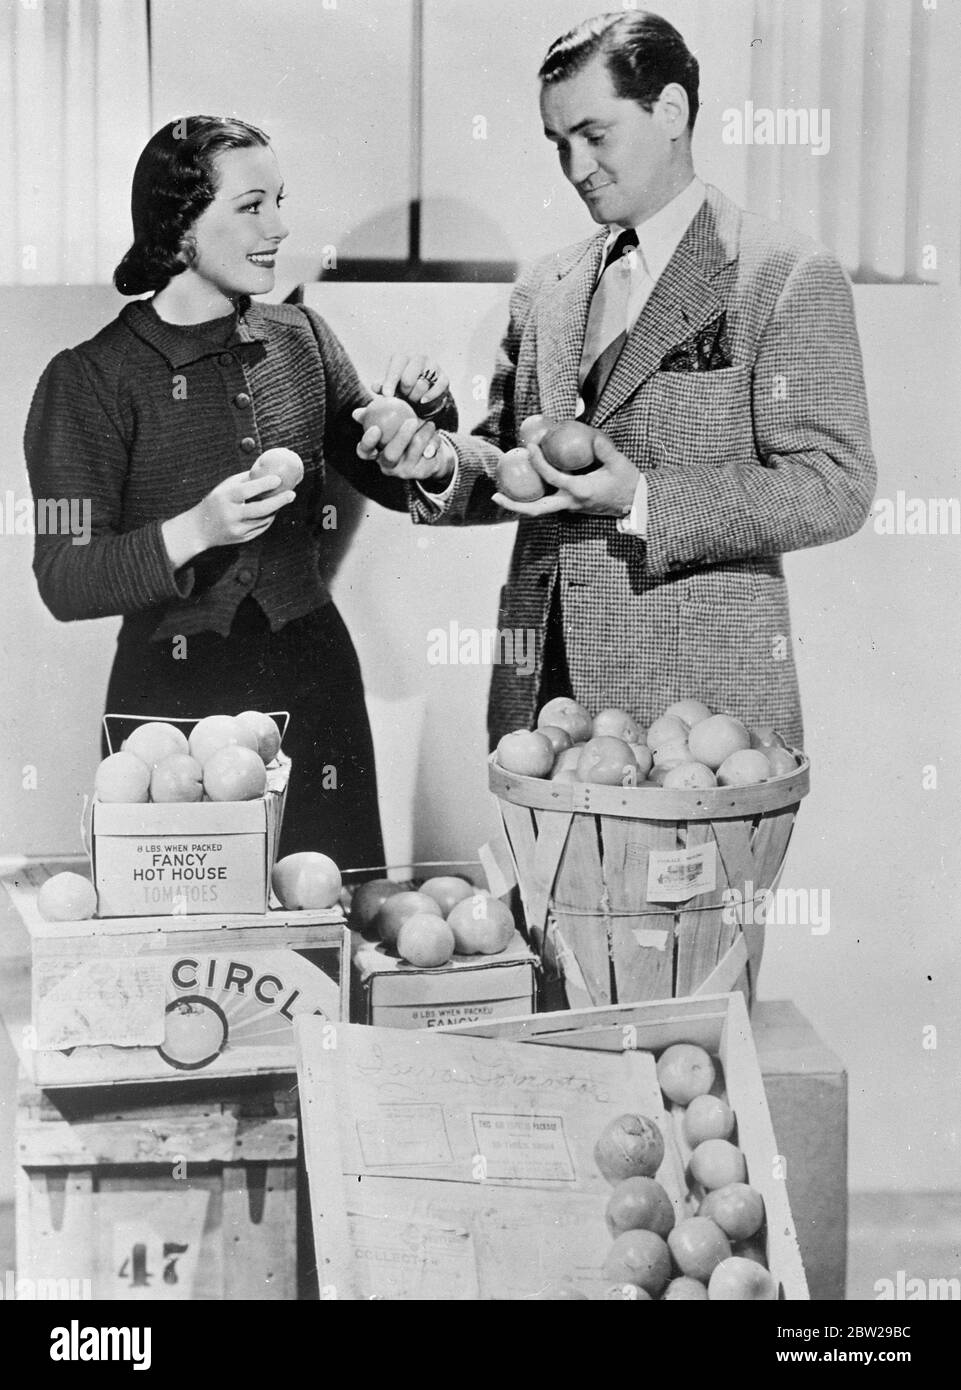 She wanted one with most 'squelch'. Gladys Swarthout, famous singer of opera and films, had one of the strangest requests when she sought the tomato with the softest flesh and most 'squelch'. The tomato was needed for her new film in which a hostile member of the audience throws it in her face. Hundreds of tomatoes, was sent by air from all parts of the country to Hollywood, to the indignation of the Los Angeles and Hollywood Chambers of Commerce. Photo shows, Gladys Swarthout with her husband and manager, Frank Chapman, selecting the appropriate tomato from a consignment sent by air from Miam Stock Photo